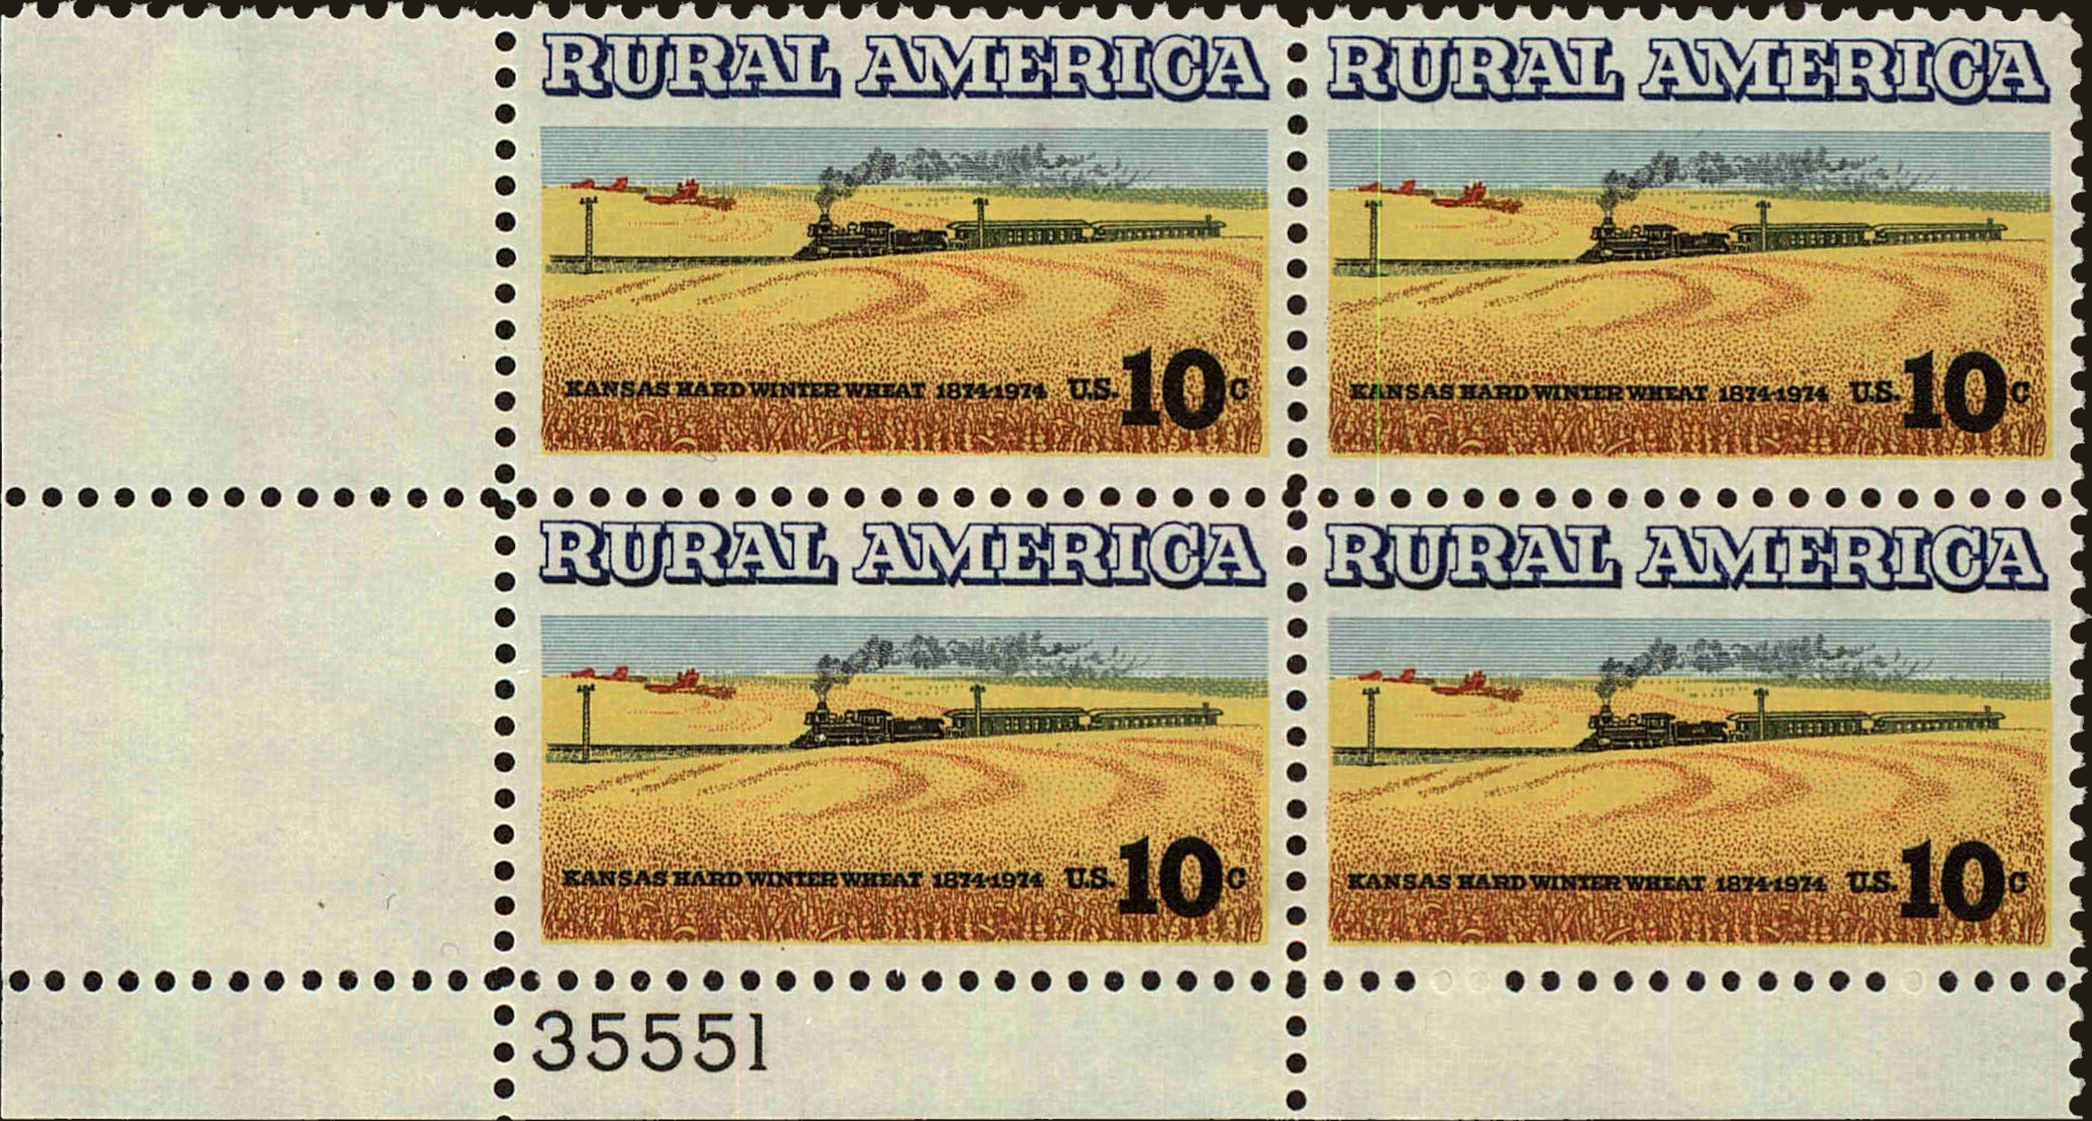 Front view of United States 1506 collectors stamp